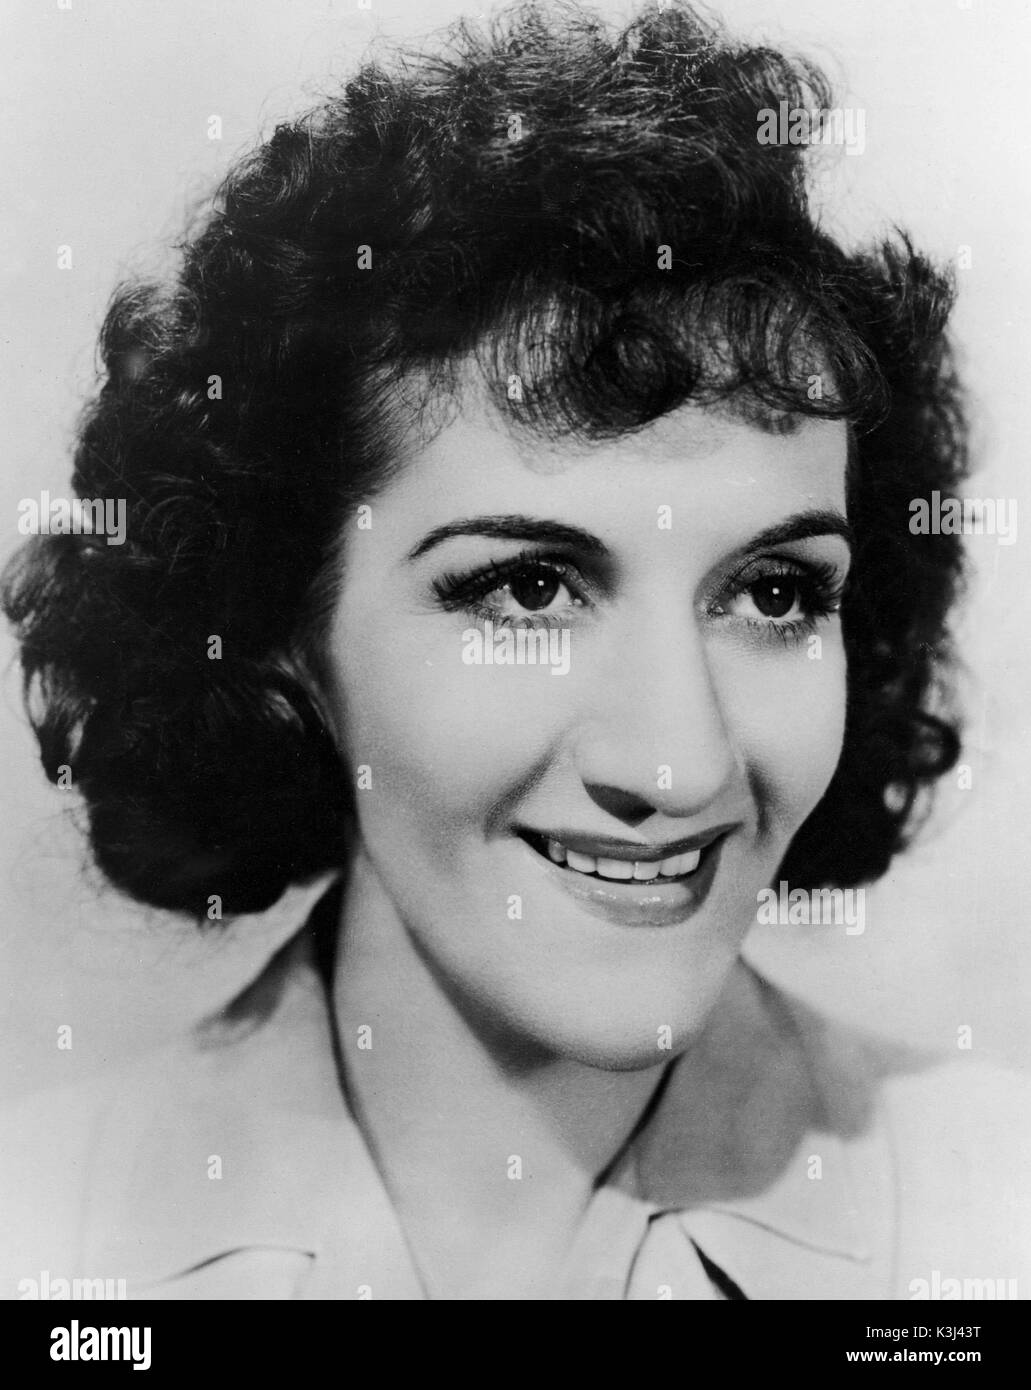 ANDREWS SISTERS Actress, Singer MAXINE ANDREWS ANDREWS SISTERS Actress, Singer, Performer MAXINE ANDREWS Stock Photo